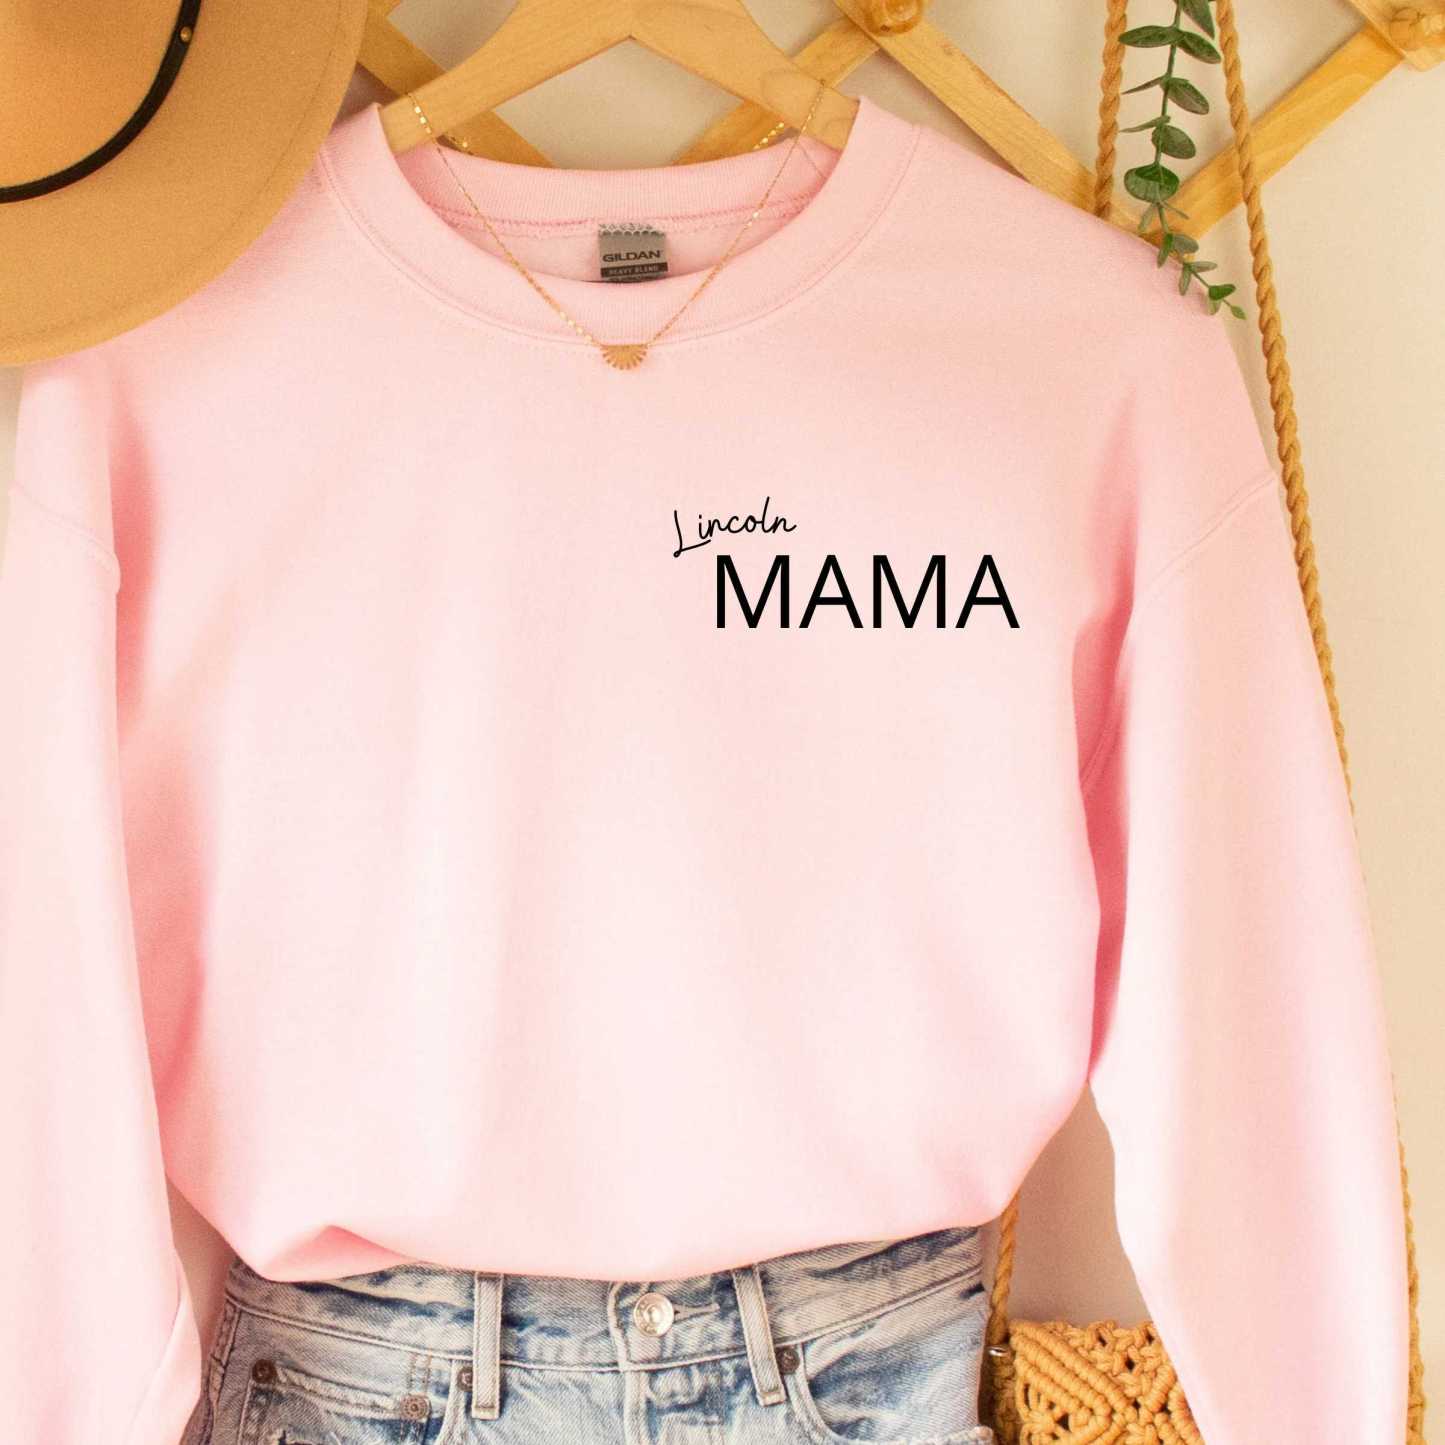 Mama Sweatshirt Personalized with Your Child's Name(s)! Kid's Names on Sweater Surrounding the Word MAMA Gift for Mom, Great New Mom Gift